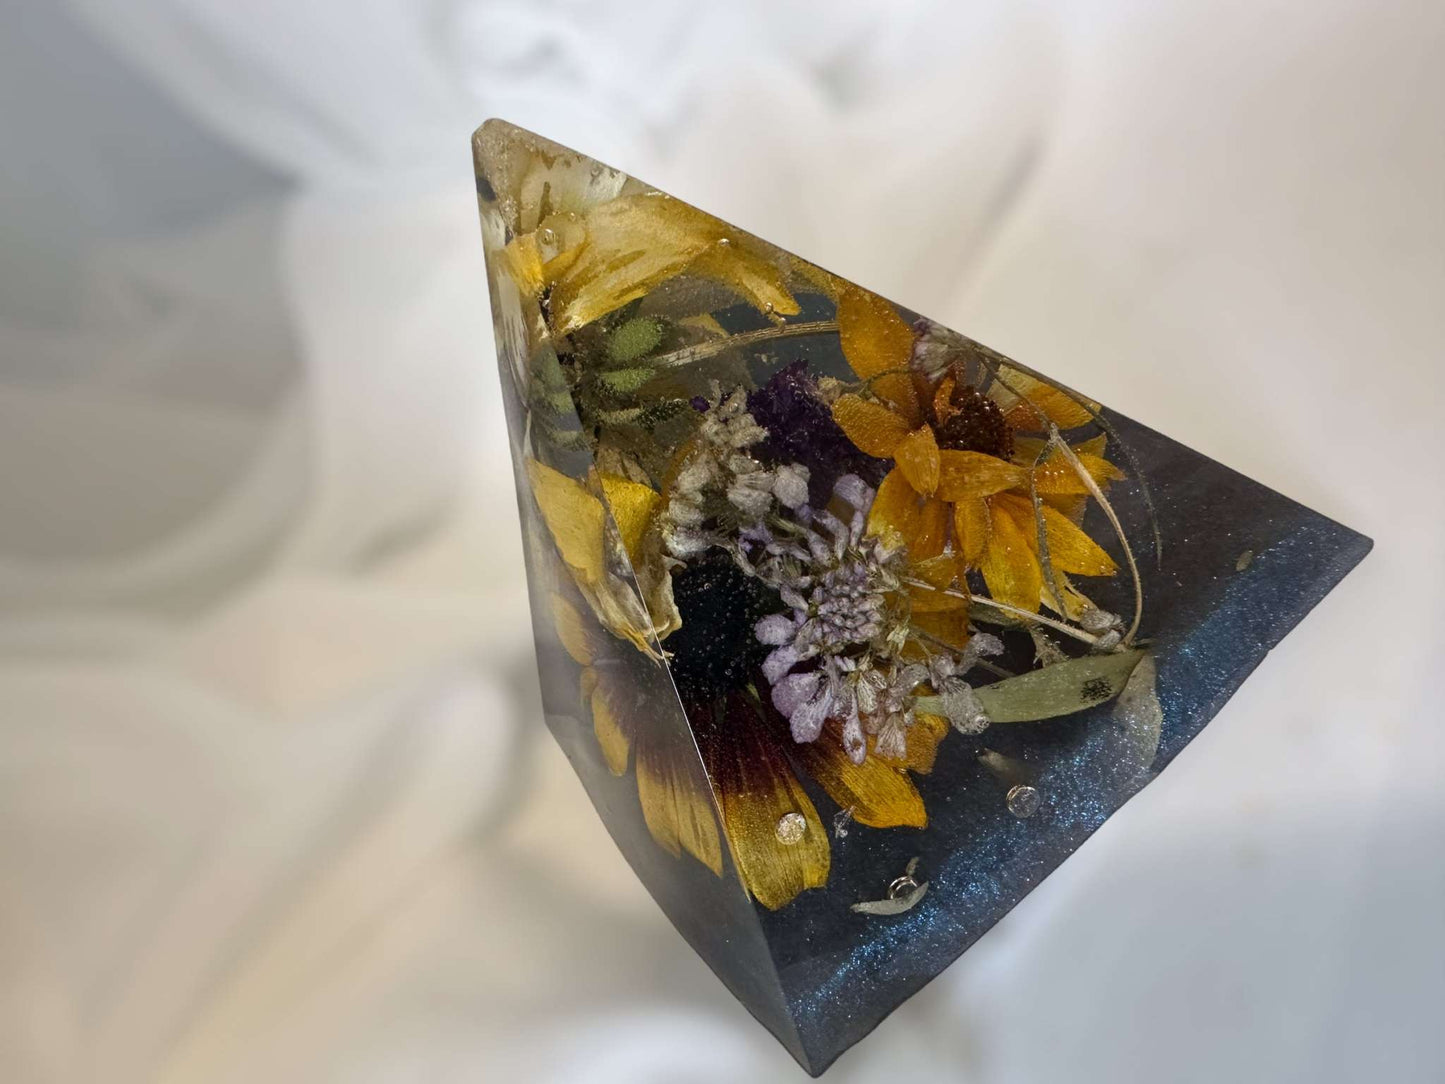 Dragonfly and Flower Resin Pyramid: Nature's Garden